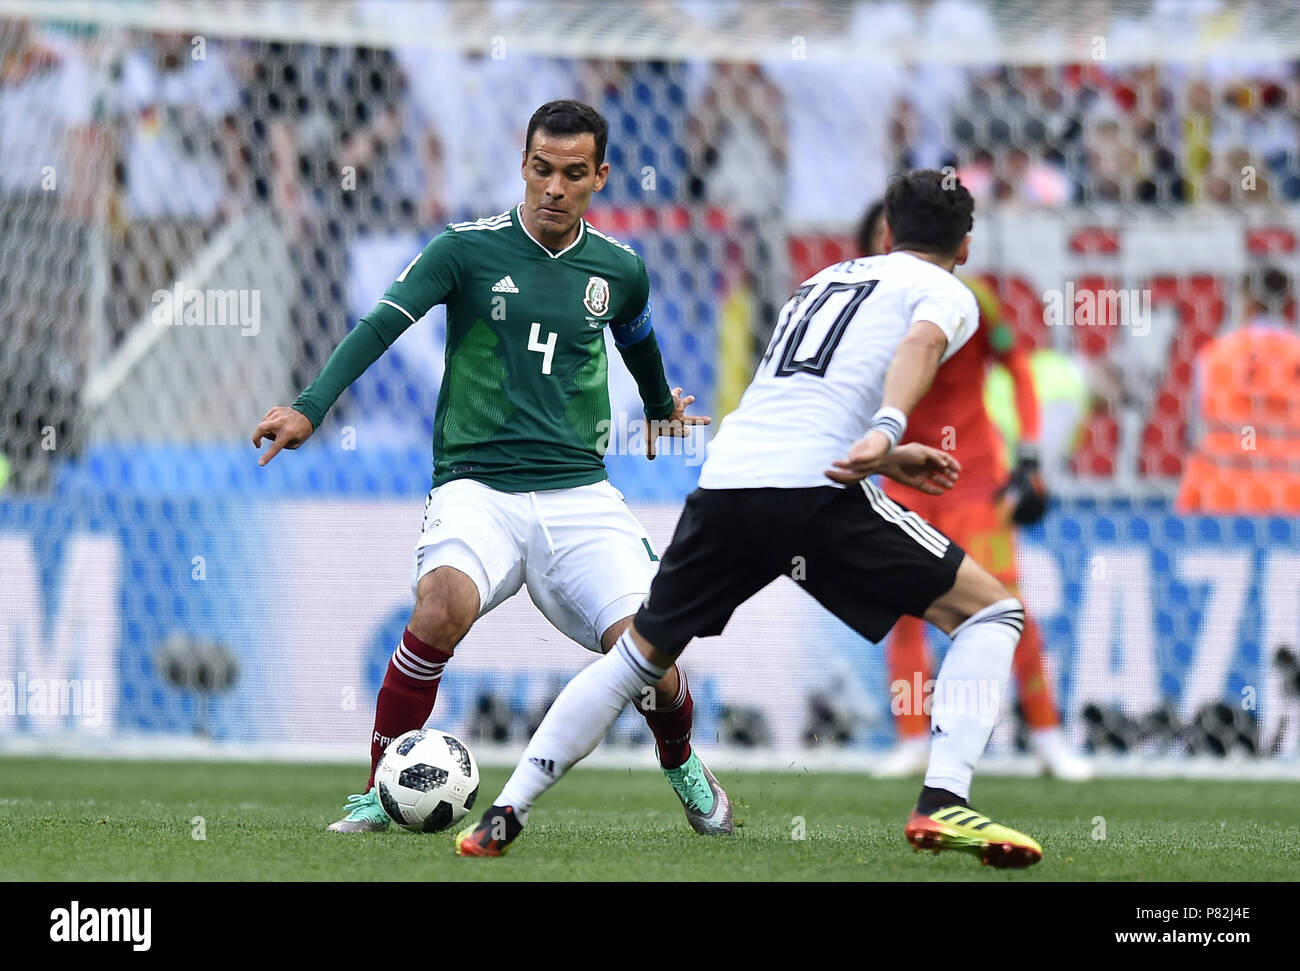 MOSCOW, RUSSIA - JUNE 17: Rafael Marquez of Mexico in action during the 2018 FIFA World Cup Russia group F match between Germany and Mexico at Luzhniki Stadium on June 17, 2018 in Moscow, Russia. (Photo by Lukasz Laskowski/PressFocus/MB Media) Stock Photo